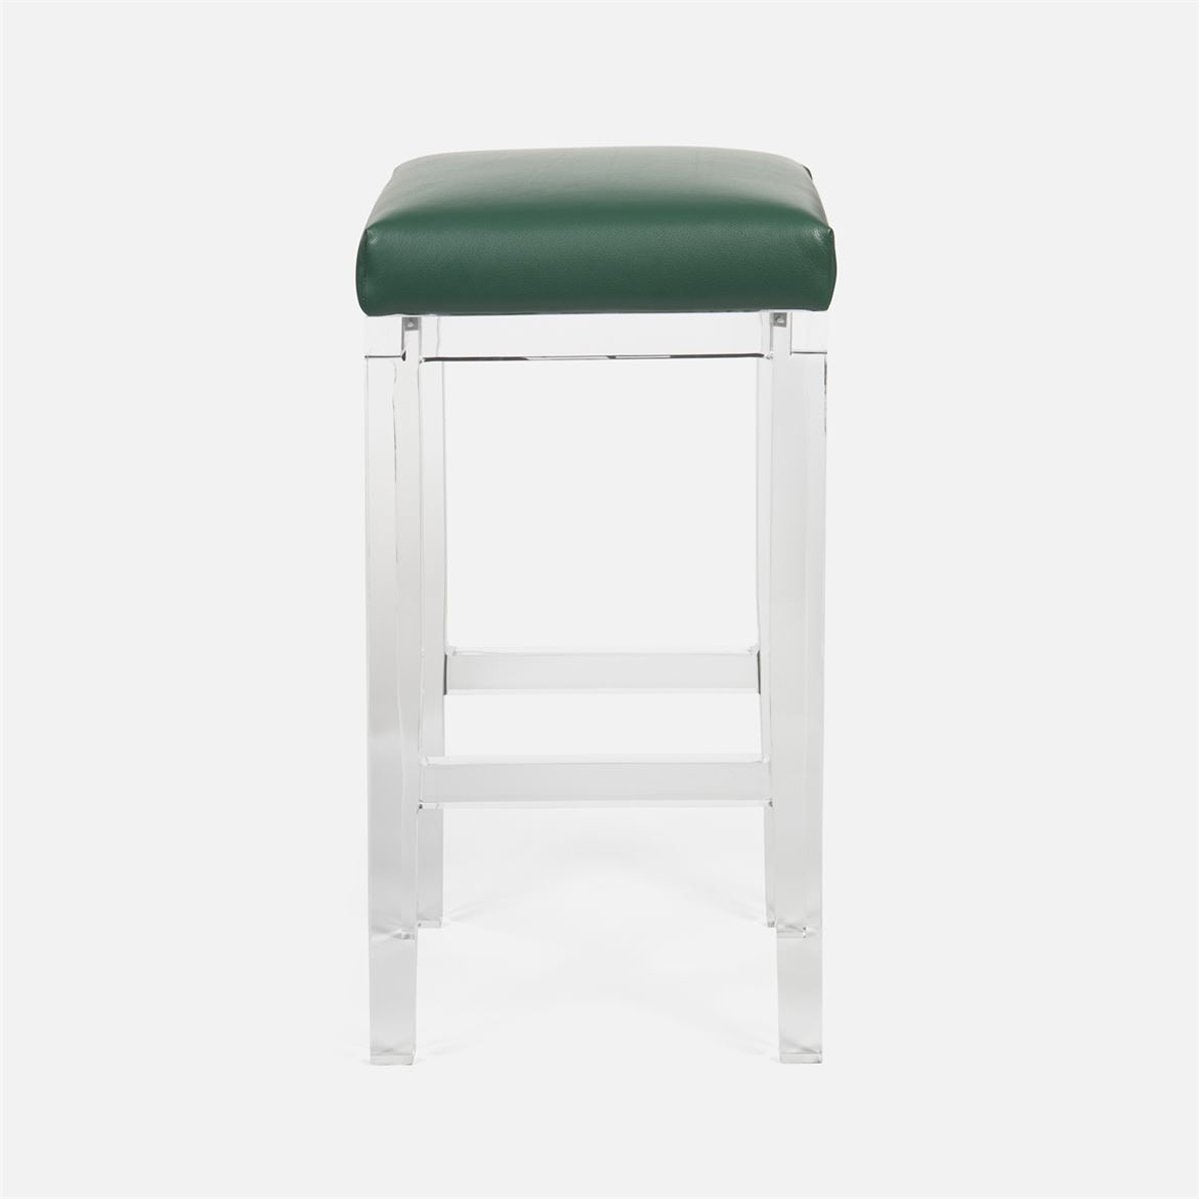 Made Goods Ramsey Bar Stool in Rhone Leather